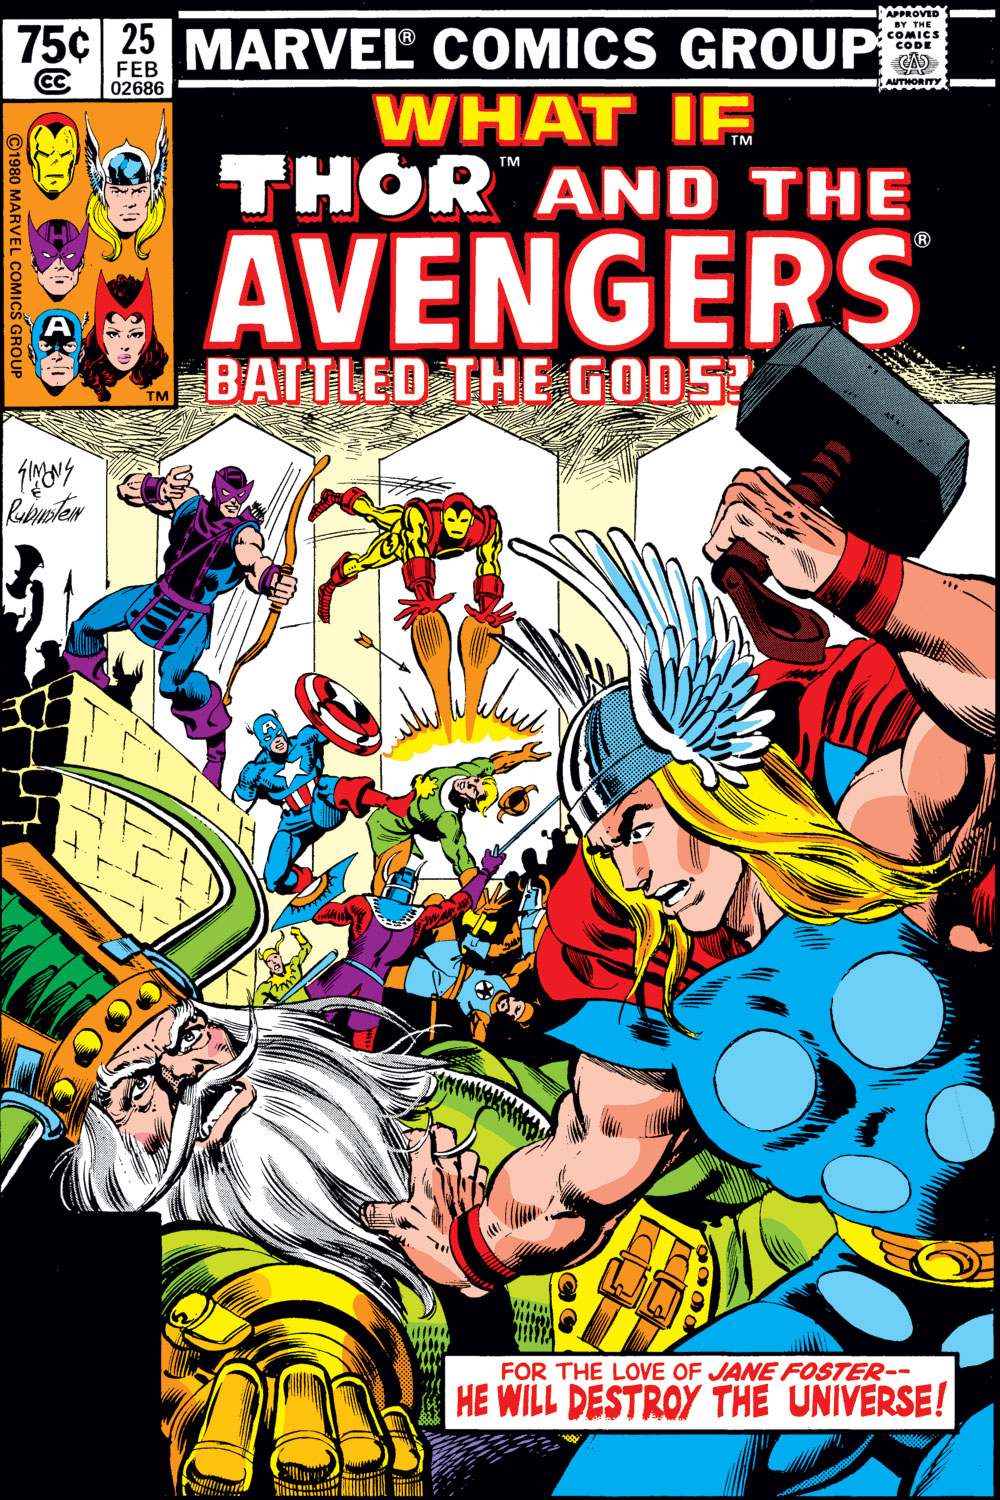 Read online What If? (1977) comic -  Issue #25 - Thor and the Avengers battled the gods - 1